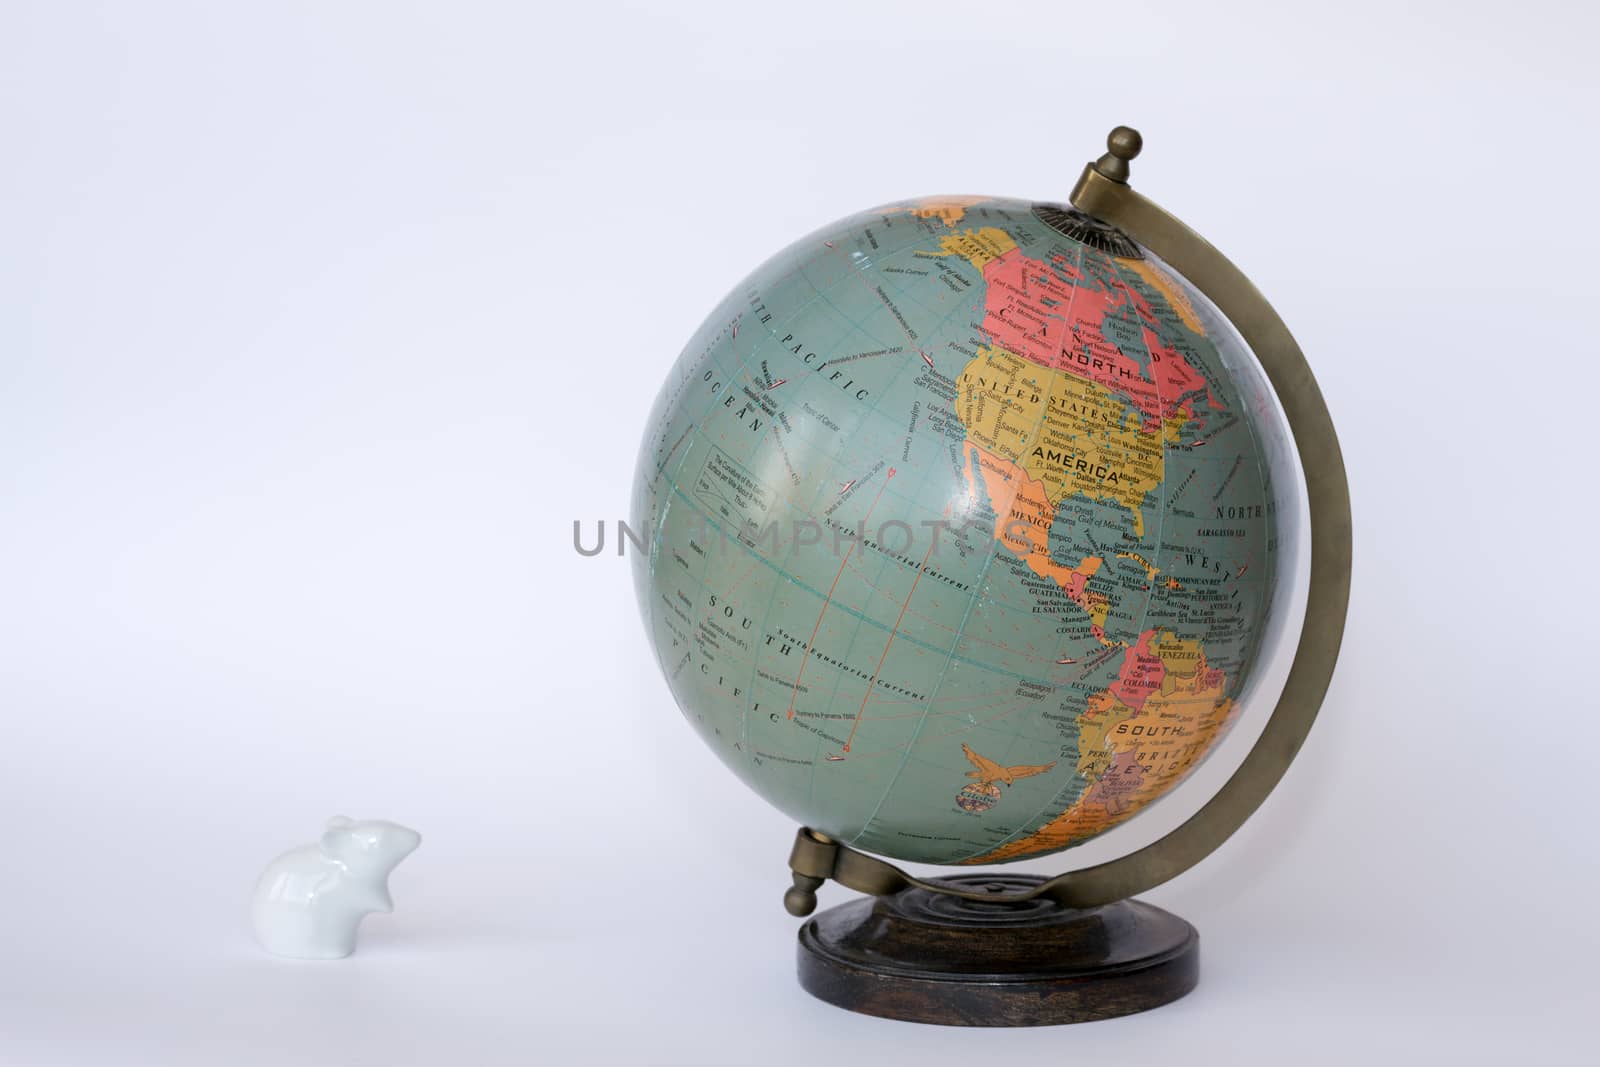 Porcelain mouse staring at a globe